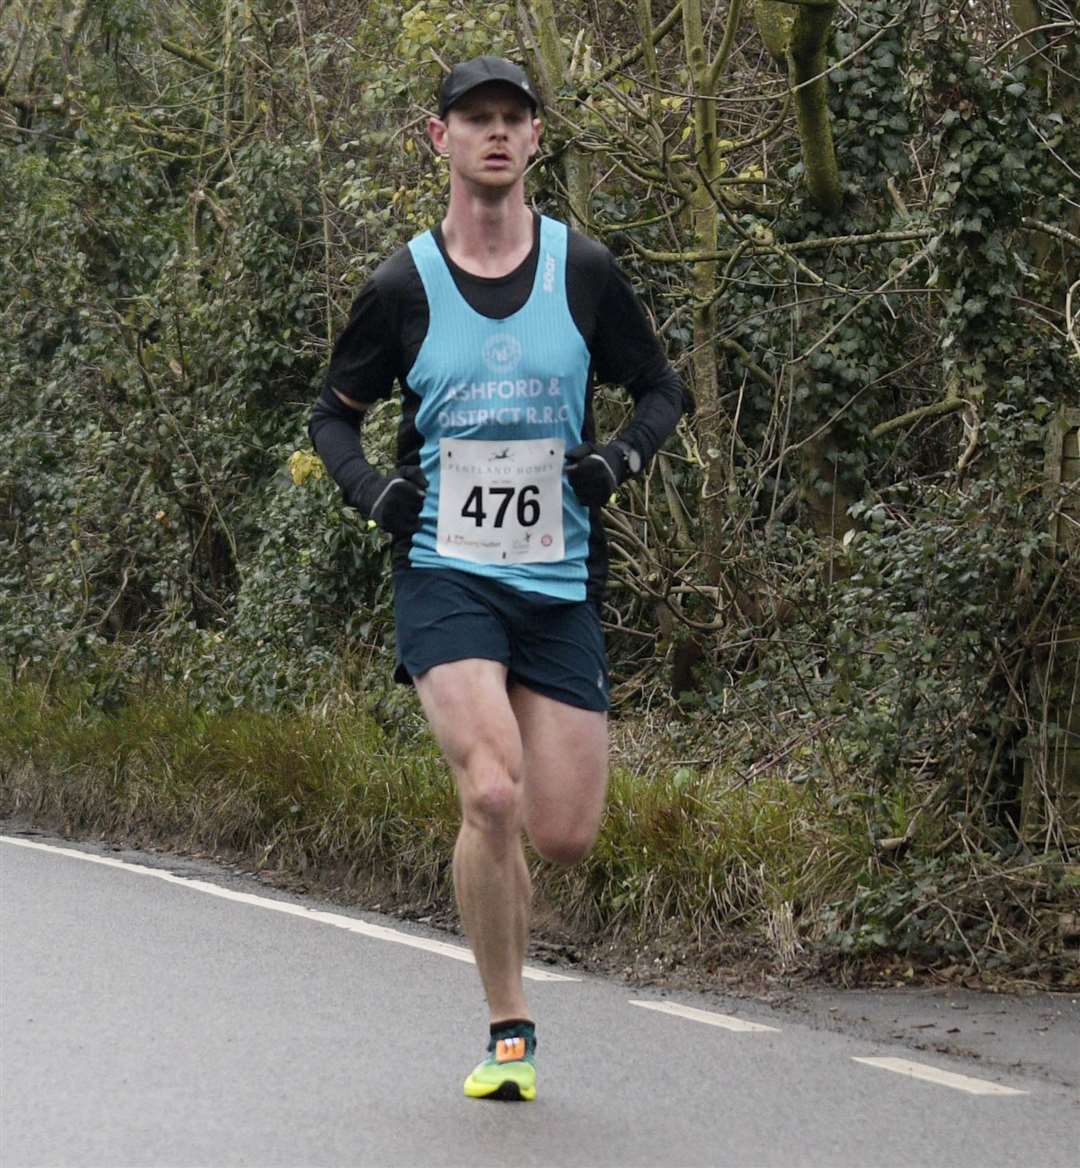 Aiden Gorham of Ashford & District Road Running Club. Picture: Barry Goodwin (62014046)